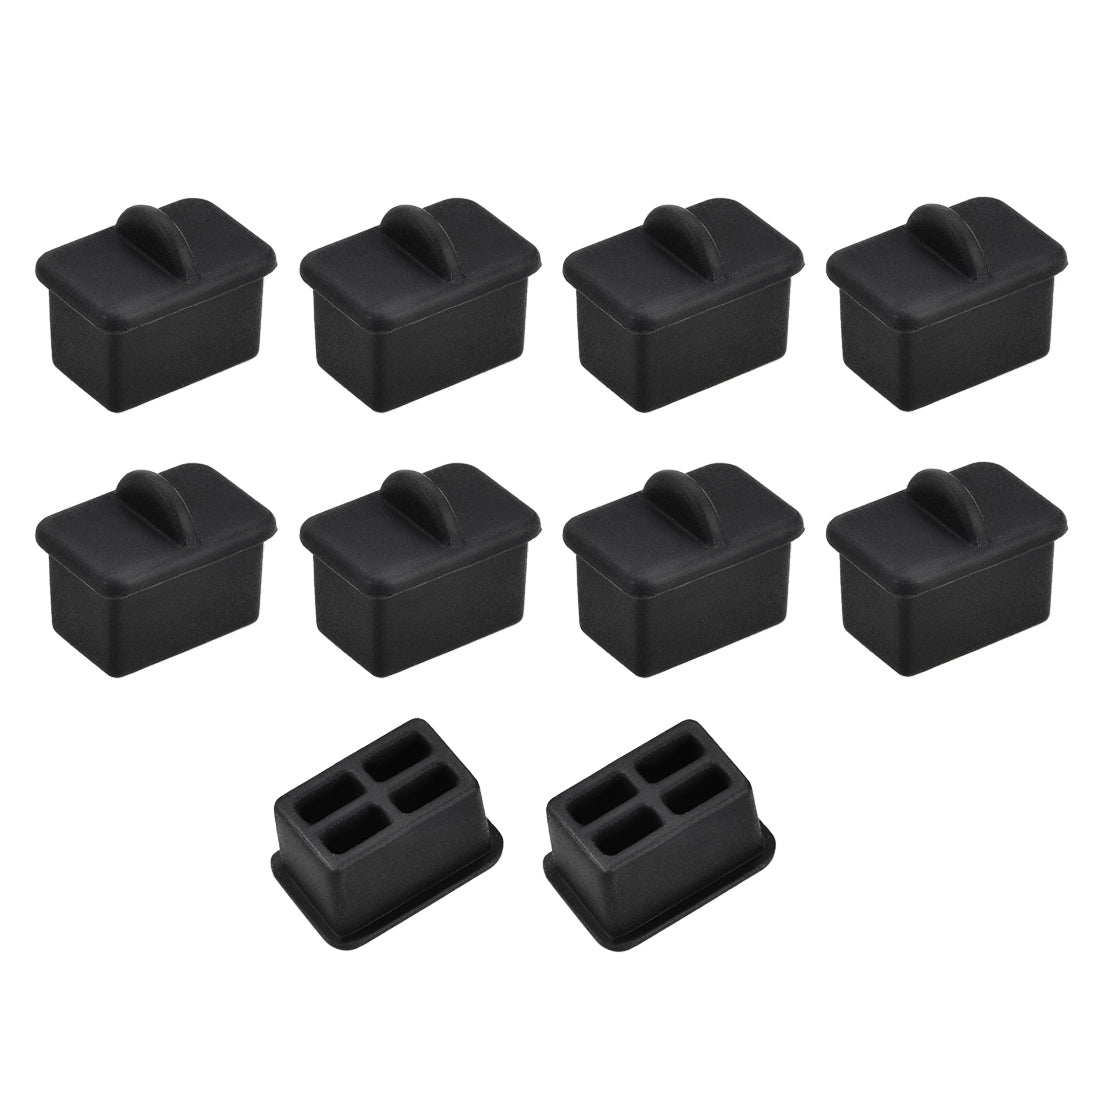 uxcell Uxcell SFP-A Port Anti-Dust Stopper Cap Cover Black Silicone 10pcs